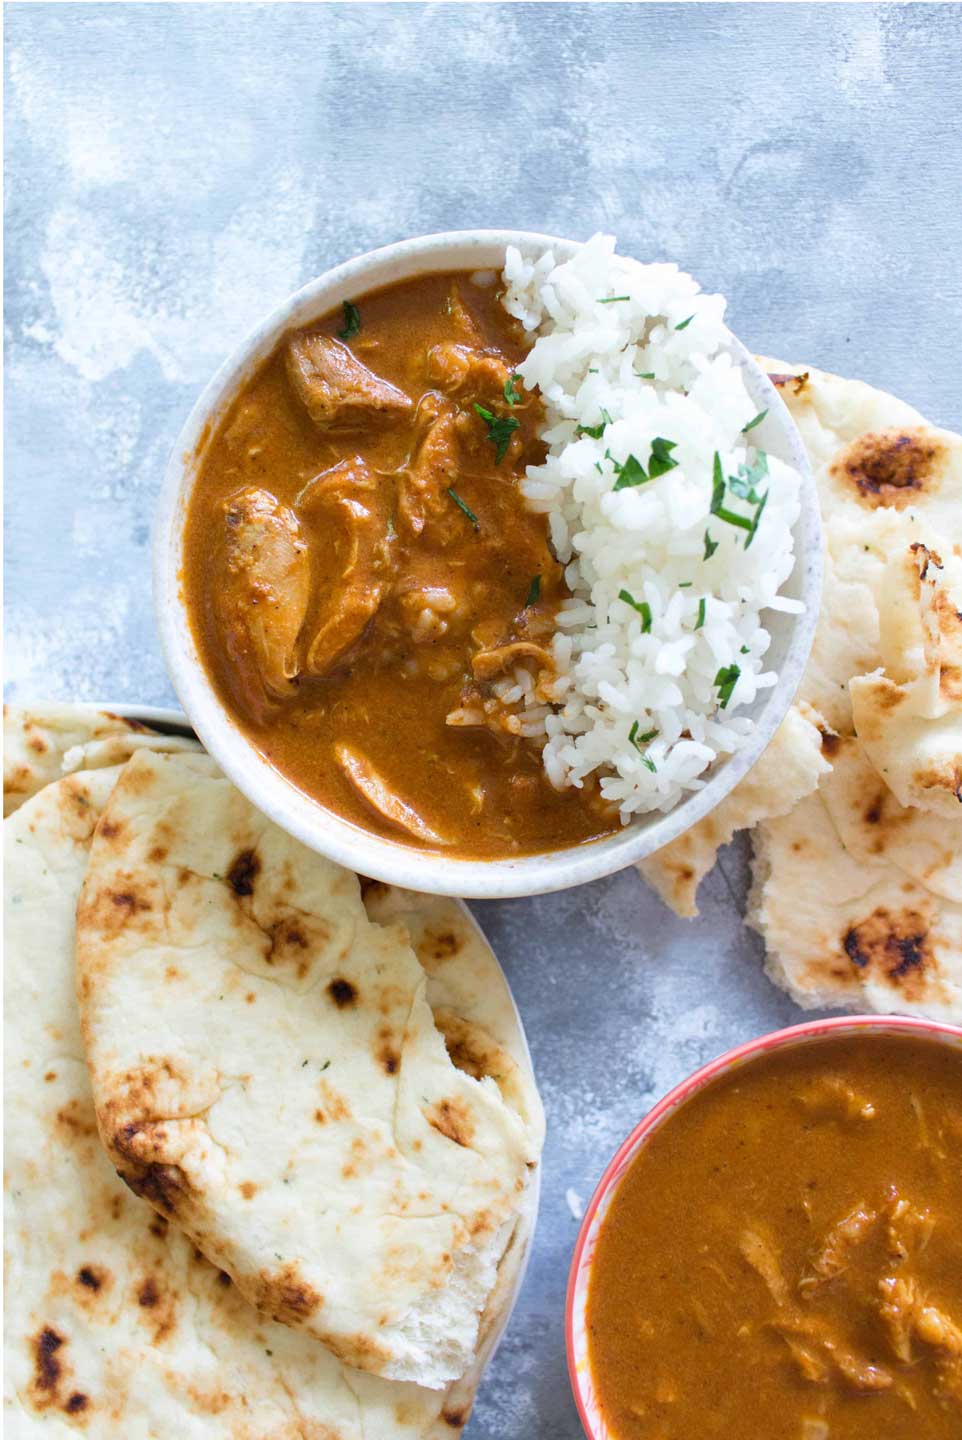 Healthy Instant Pot Butter Chicken from Carmy at the blog Carmy is just one of 20 pressure cooker chicken recipes we picked out to share with you today. Make sure to check ‘em all out – so many great ideas!